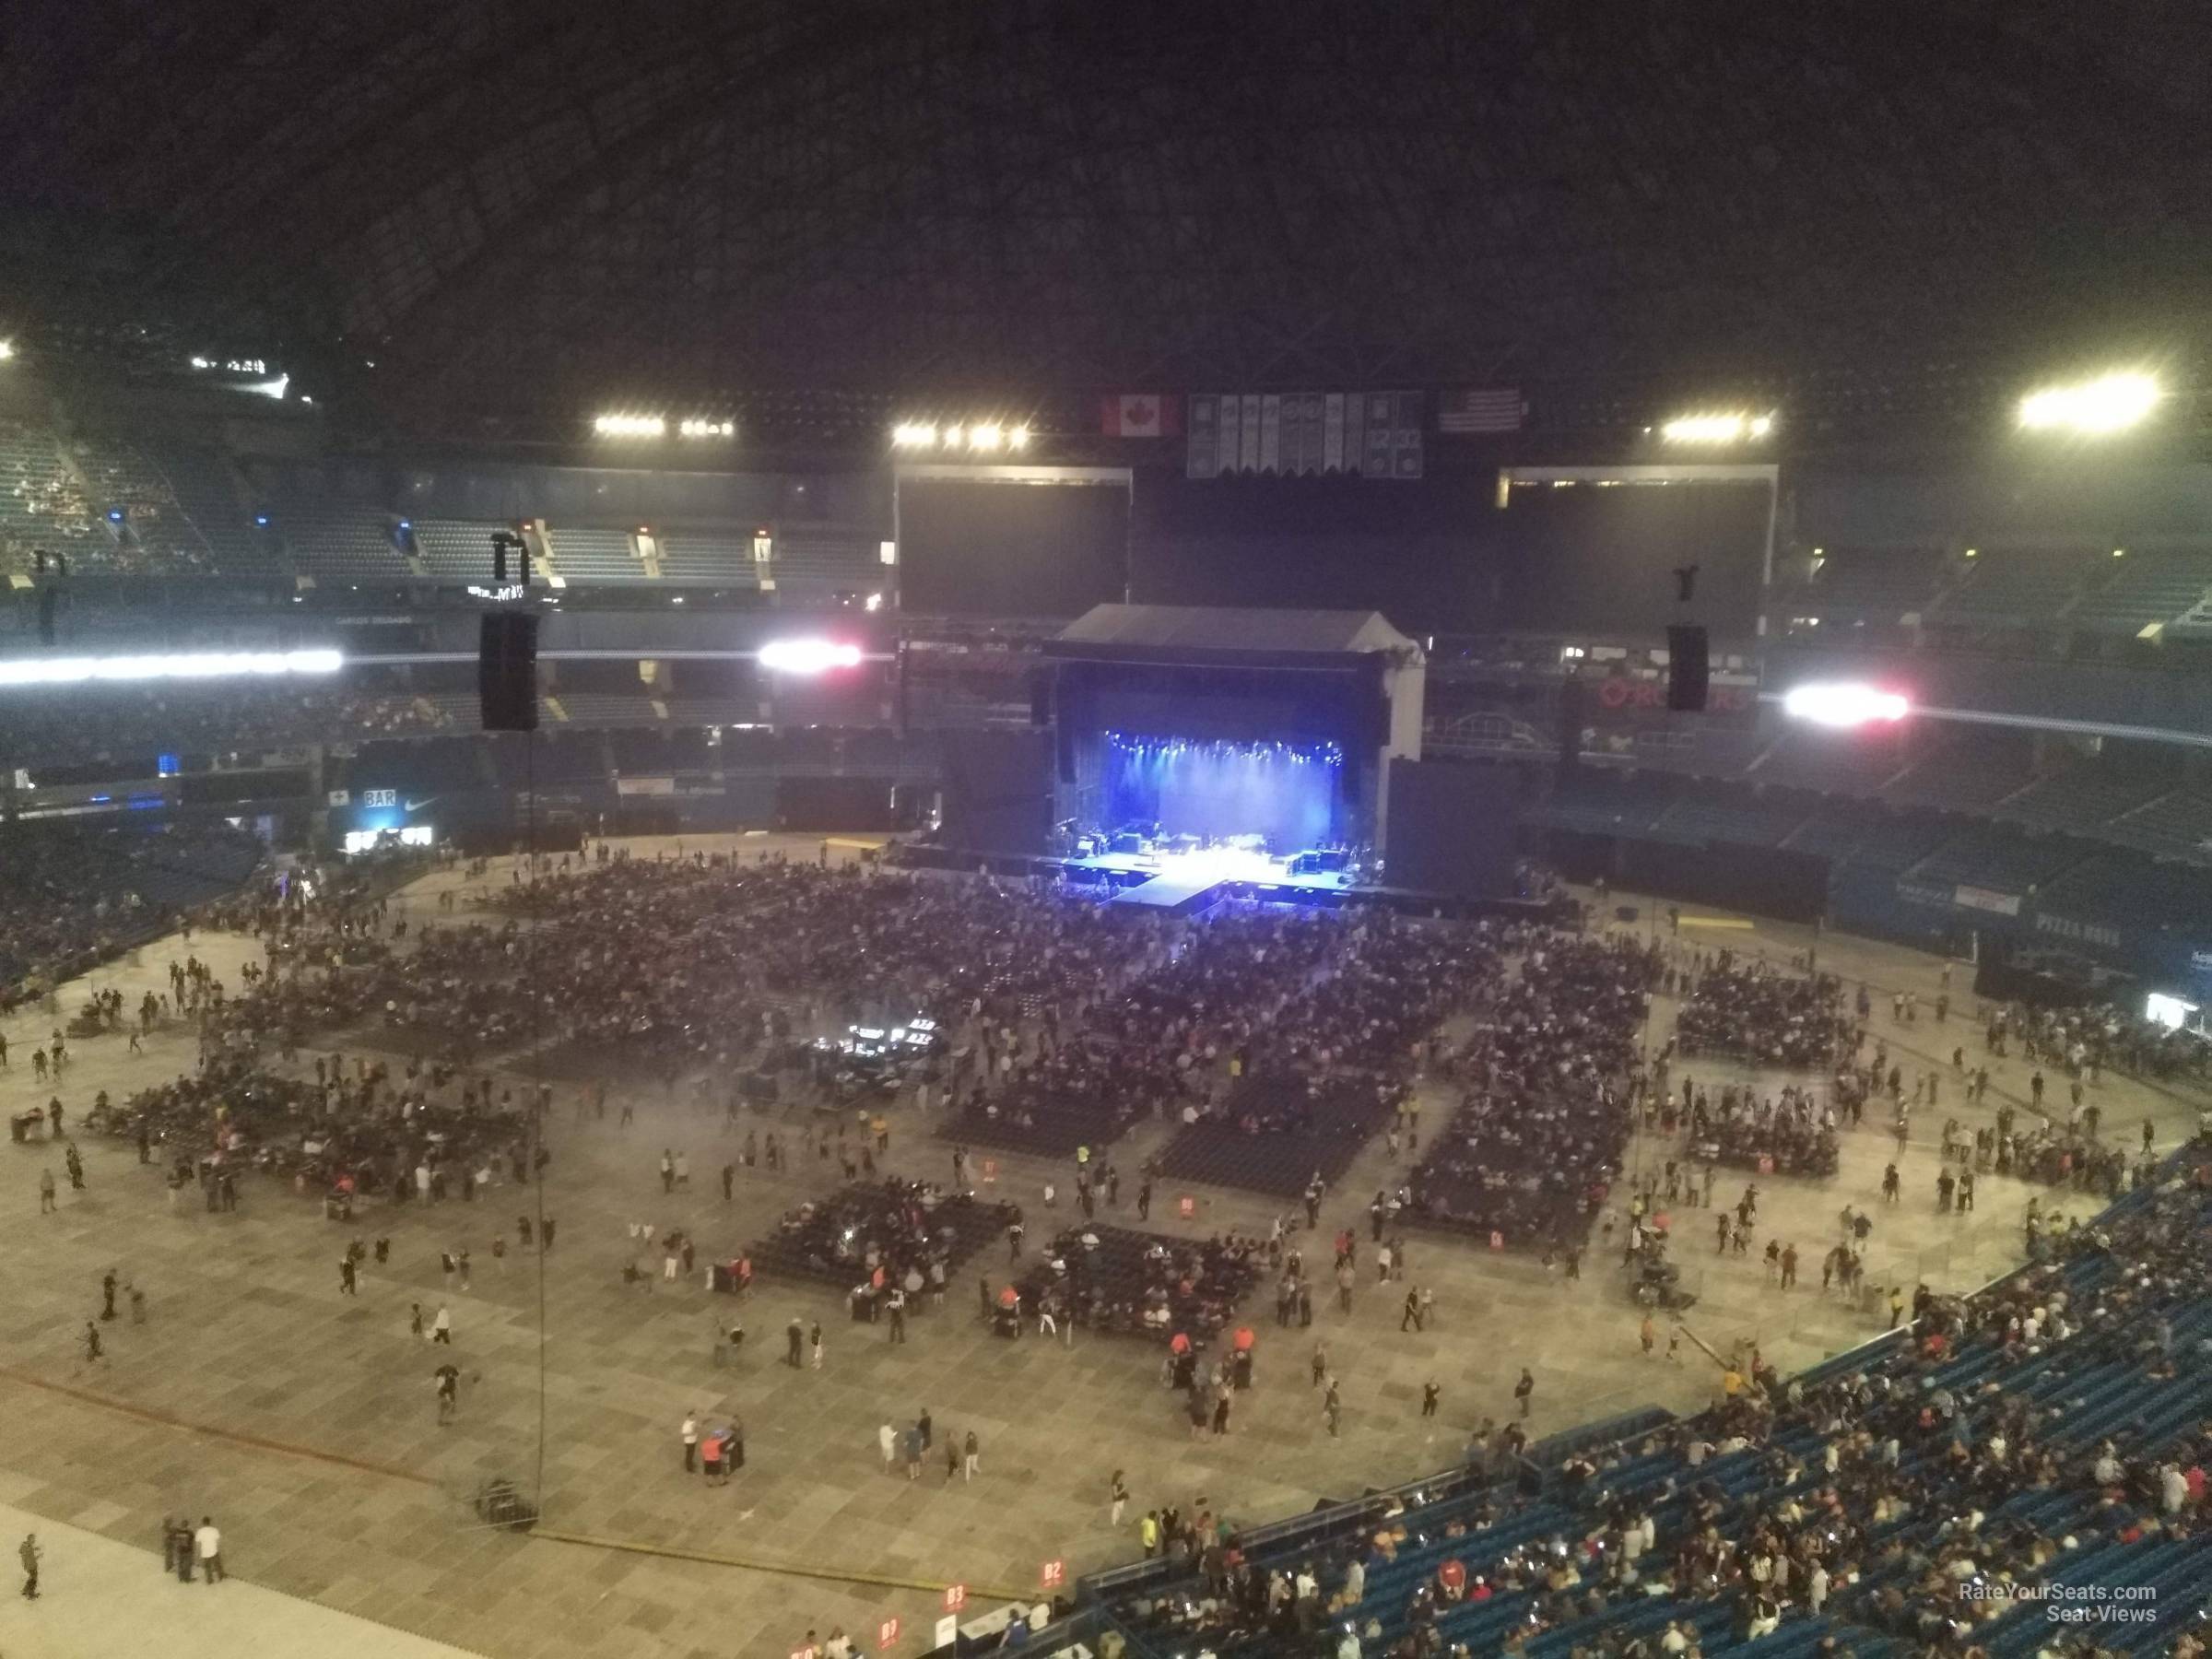 section 520, row 5 seat view  for concert - rogers centre